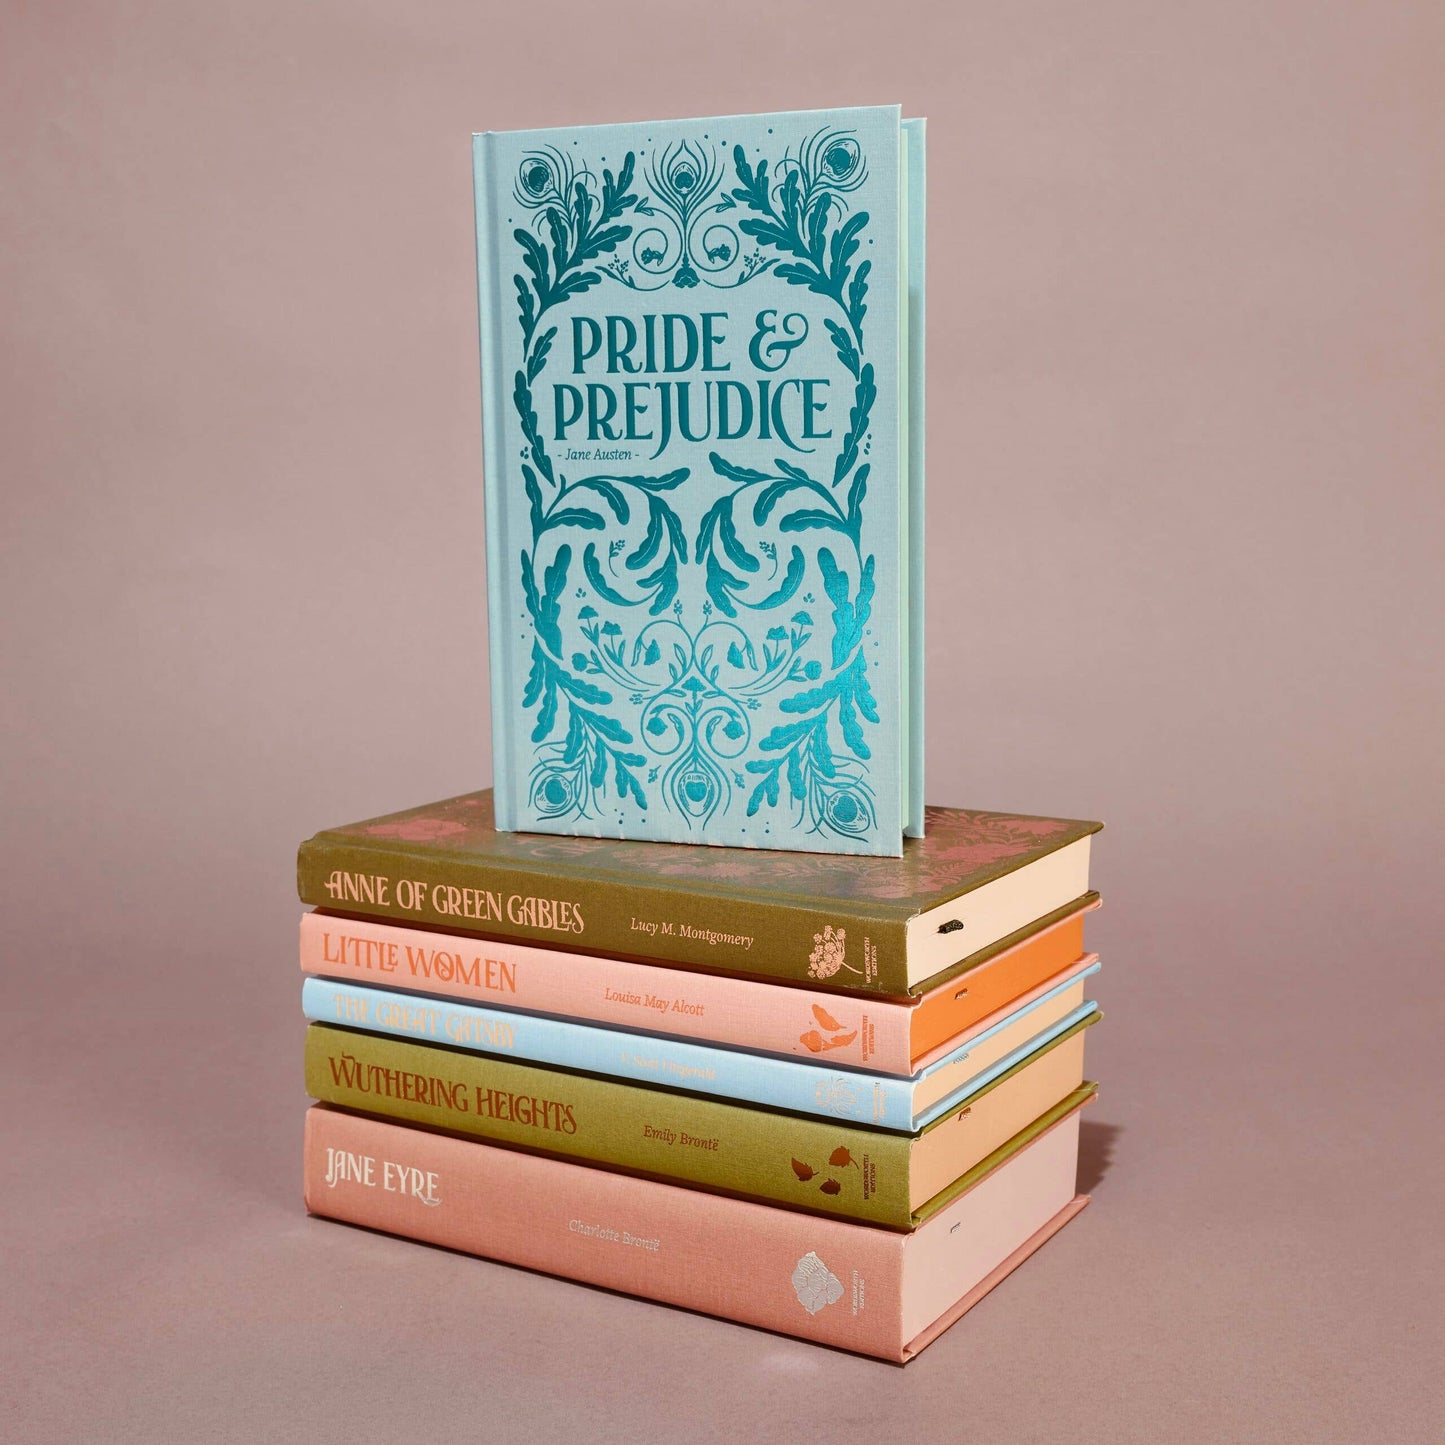 Marble City Press Luxe edition of Jane Eyre, available at LaSource in Darien